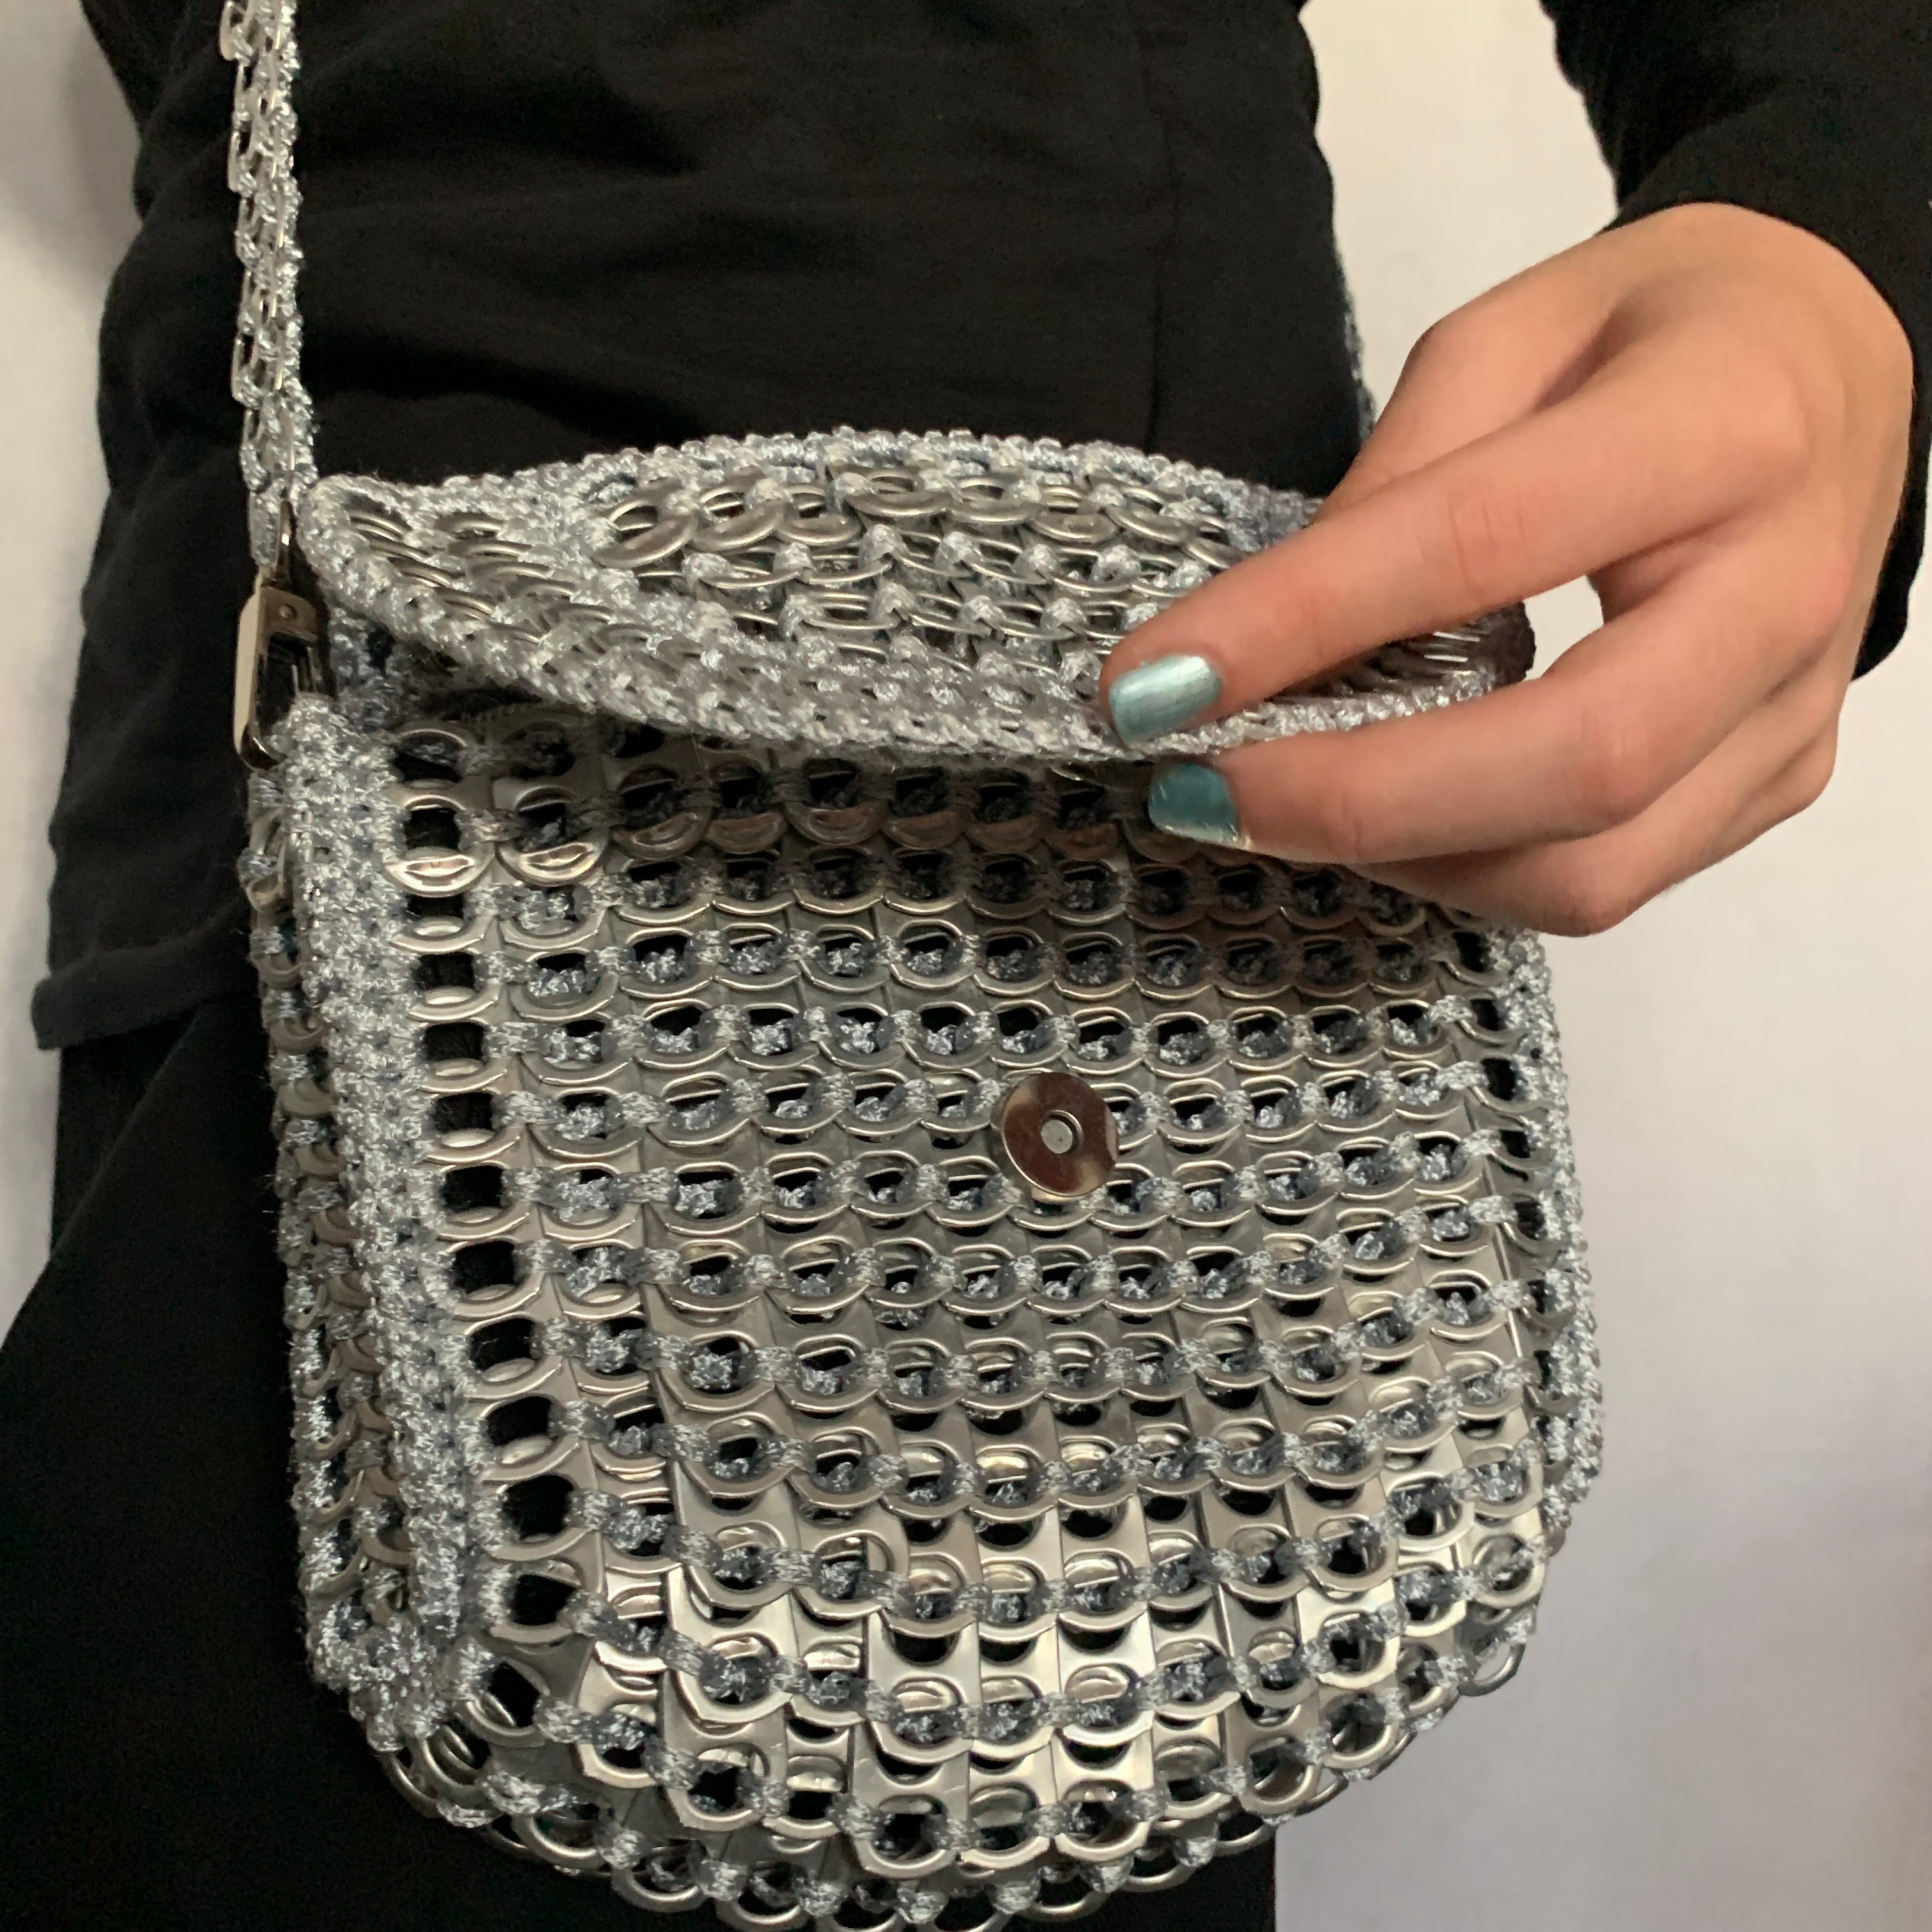 Metal Mickey Bag by Soda Pop - Handmade with Crocheted Ring-Pulls